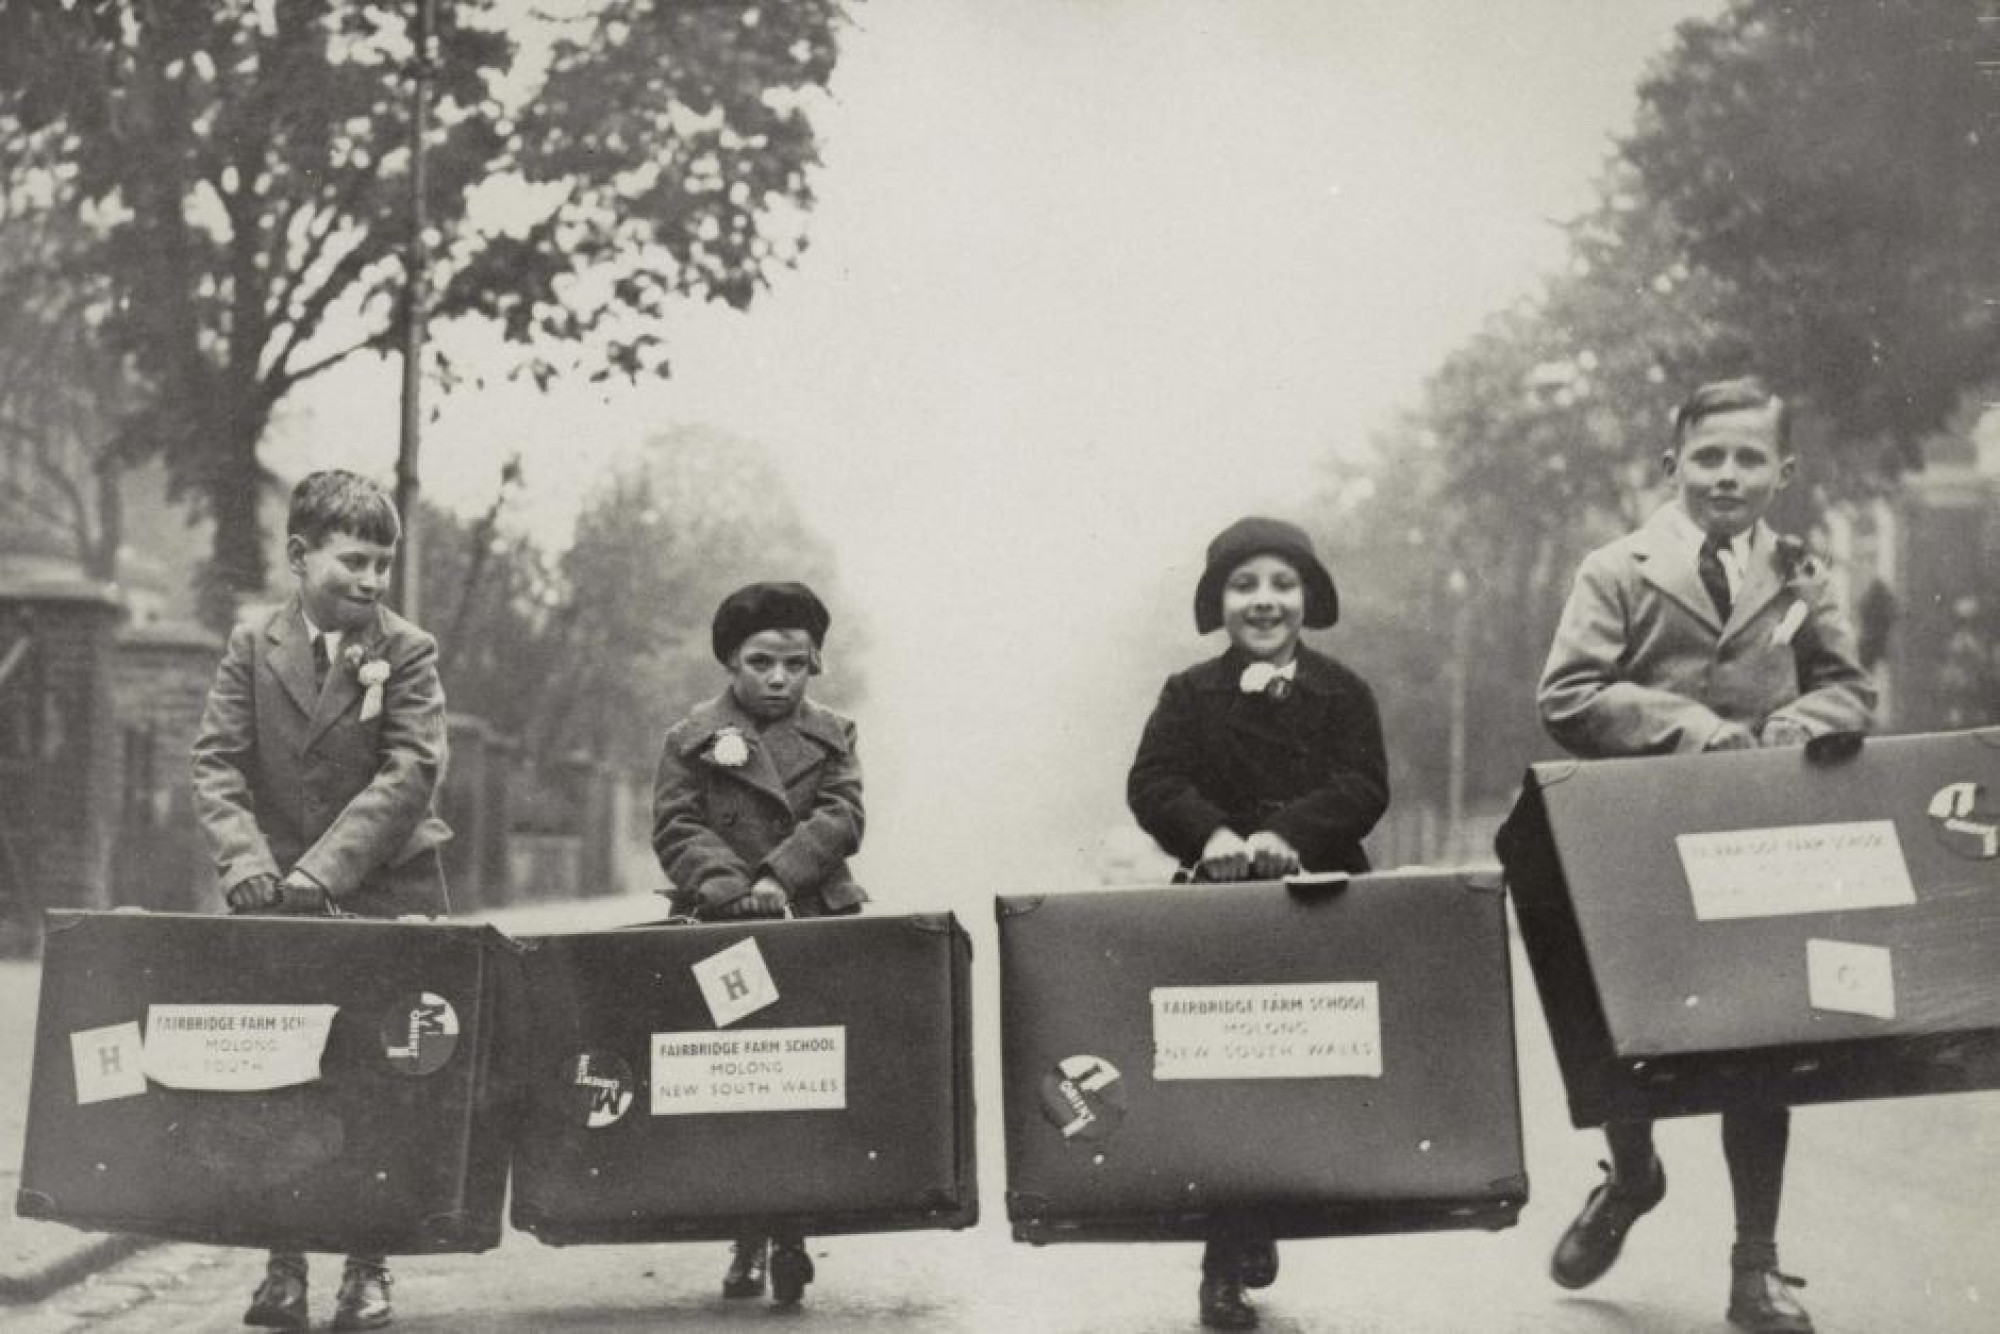 Black-and-white photo of child emigrés in late 1930s